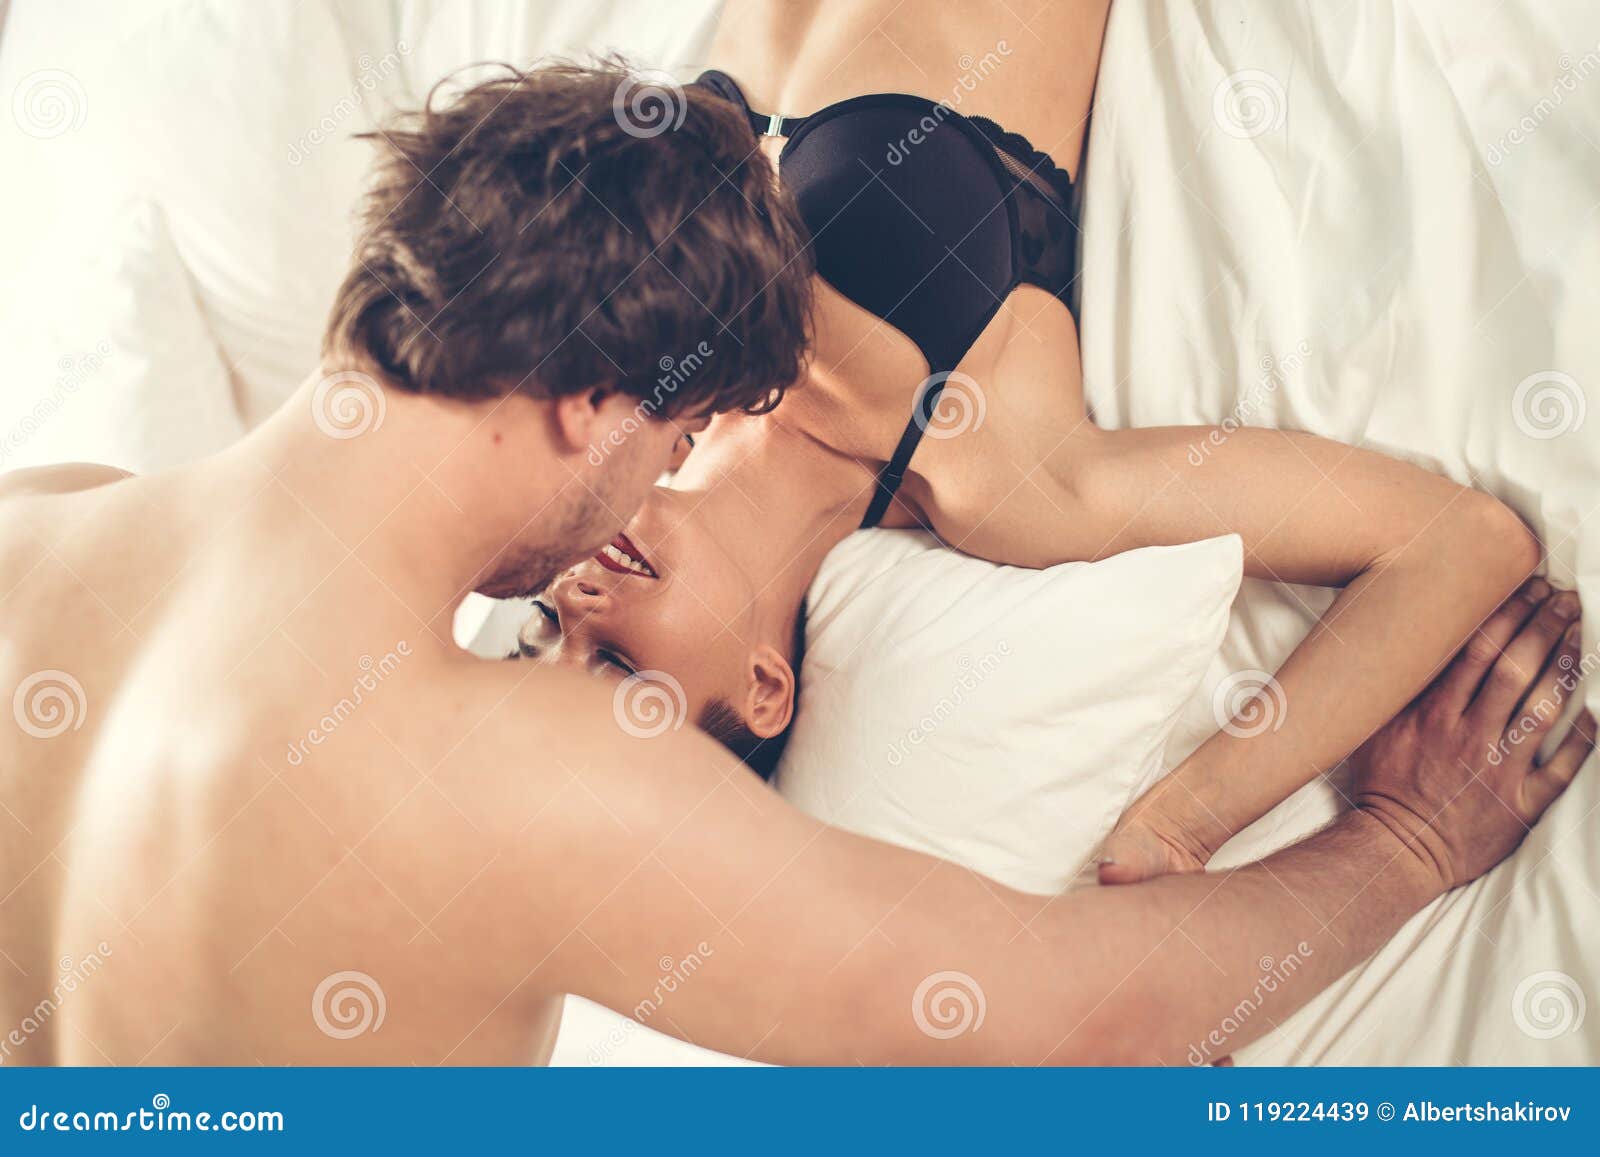 Passionate love making between man and woman